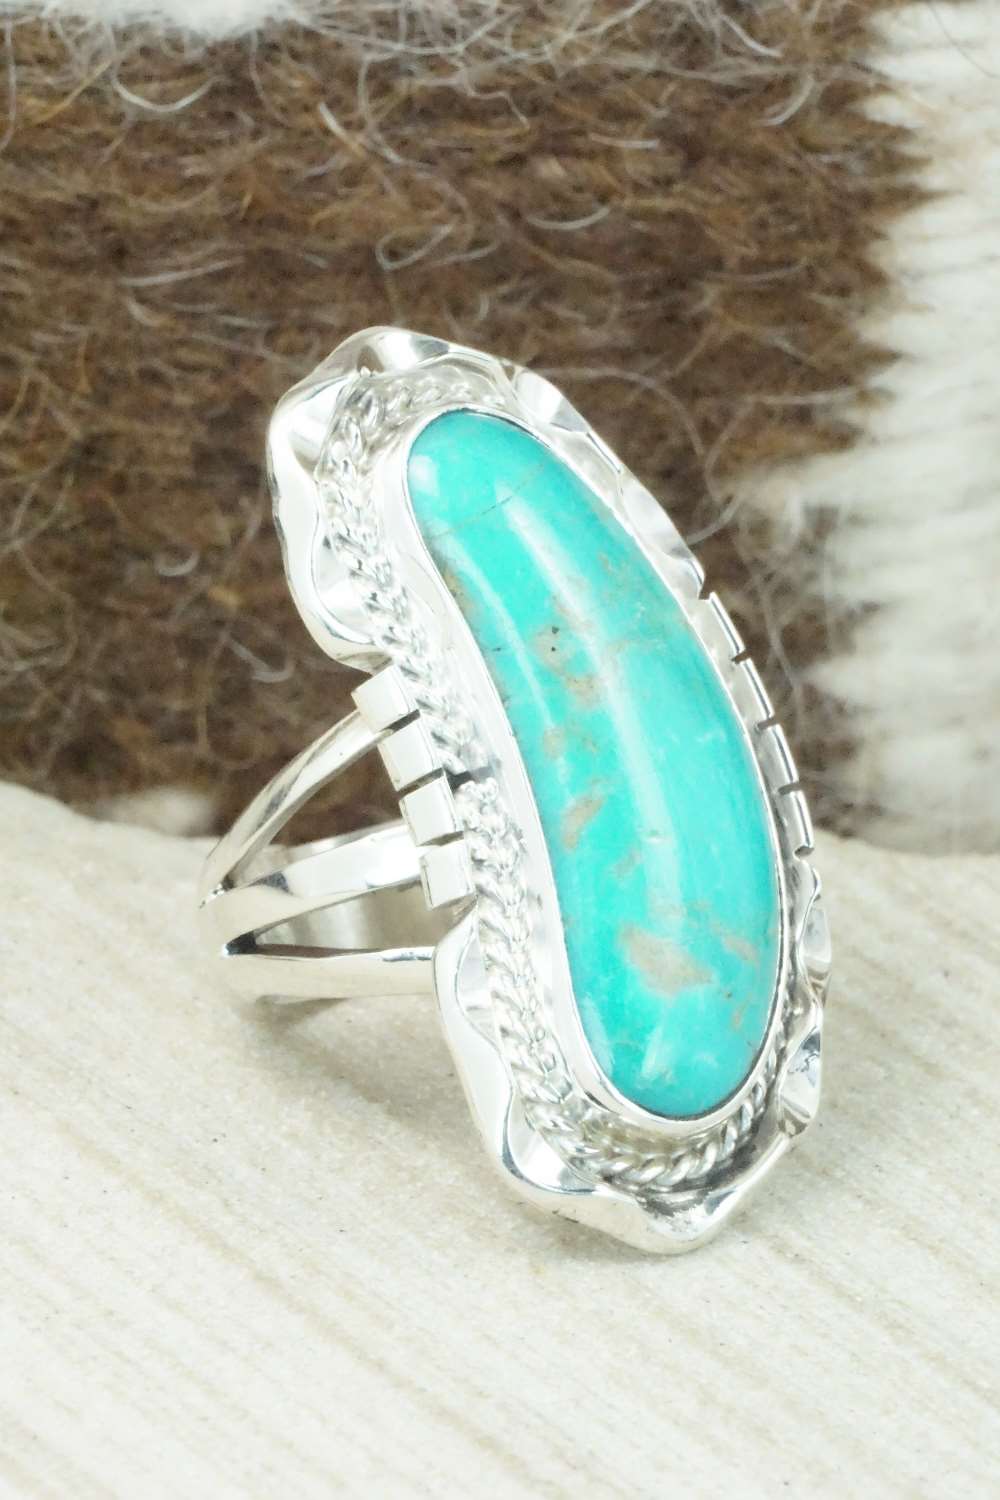 Turquoise & Sterling Silver Ring - Samuel Yellowhair - Size 5.5